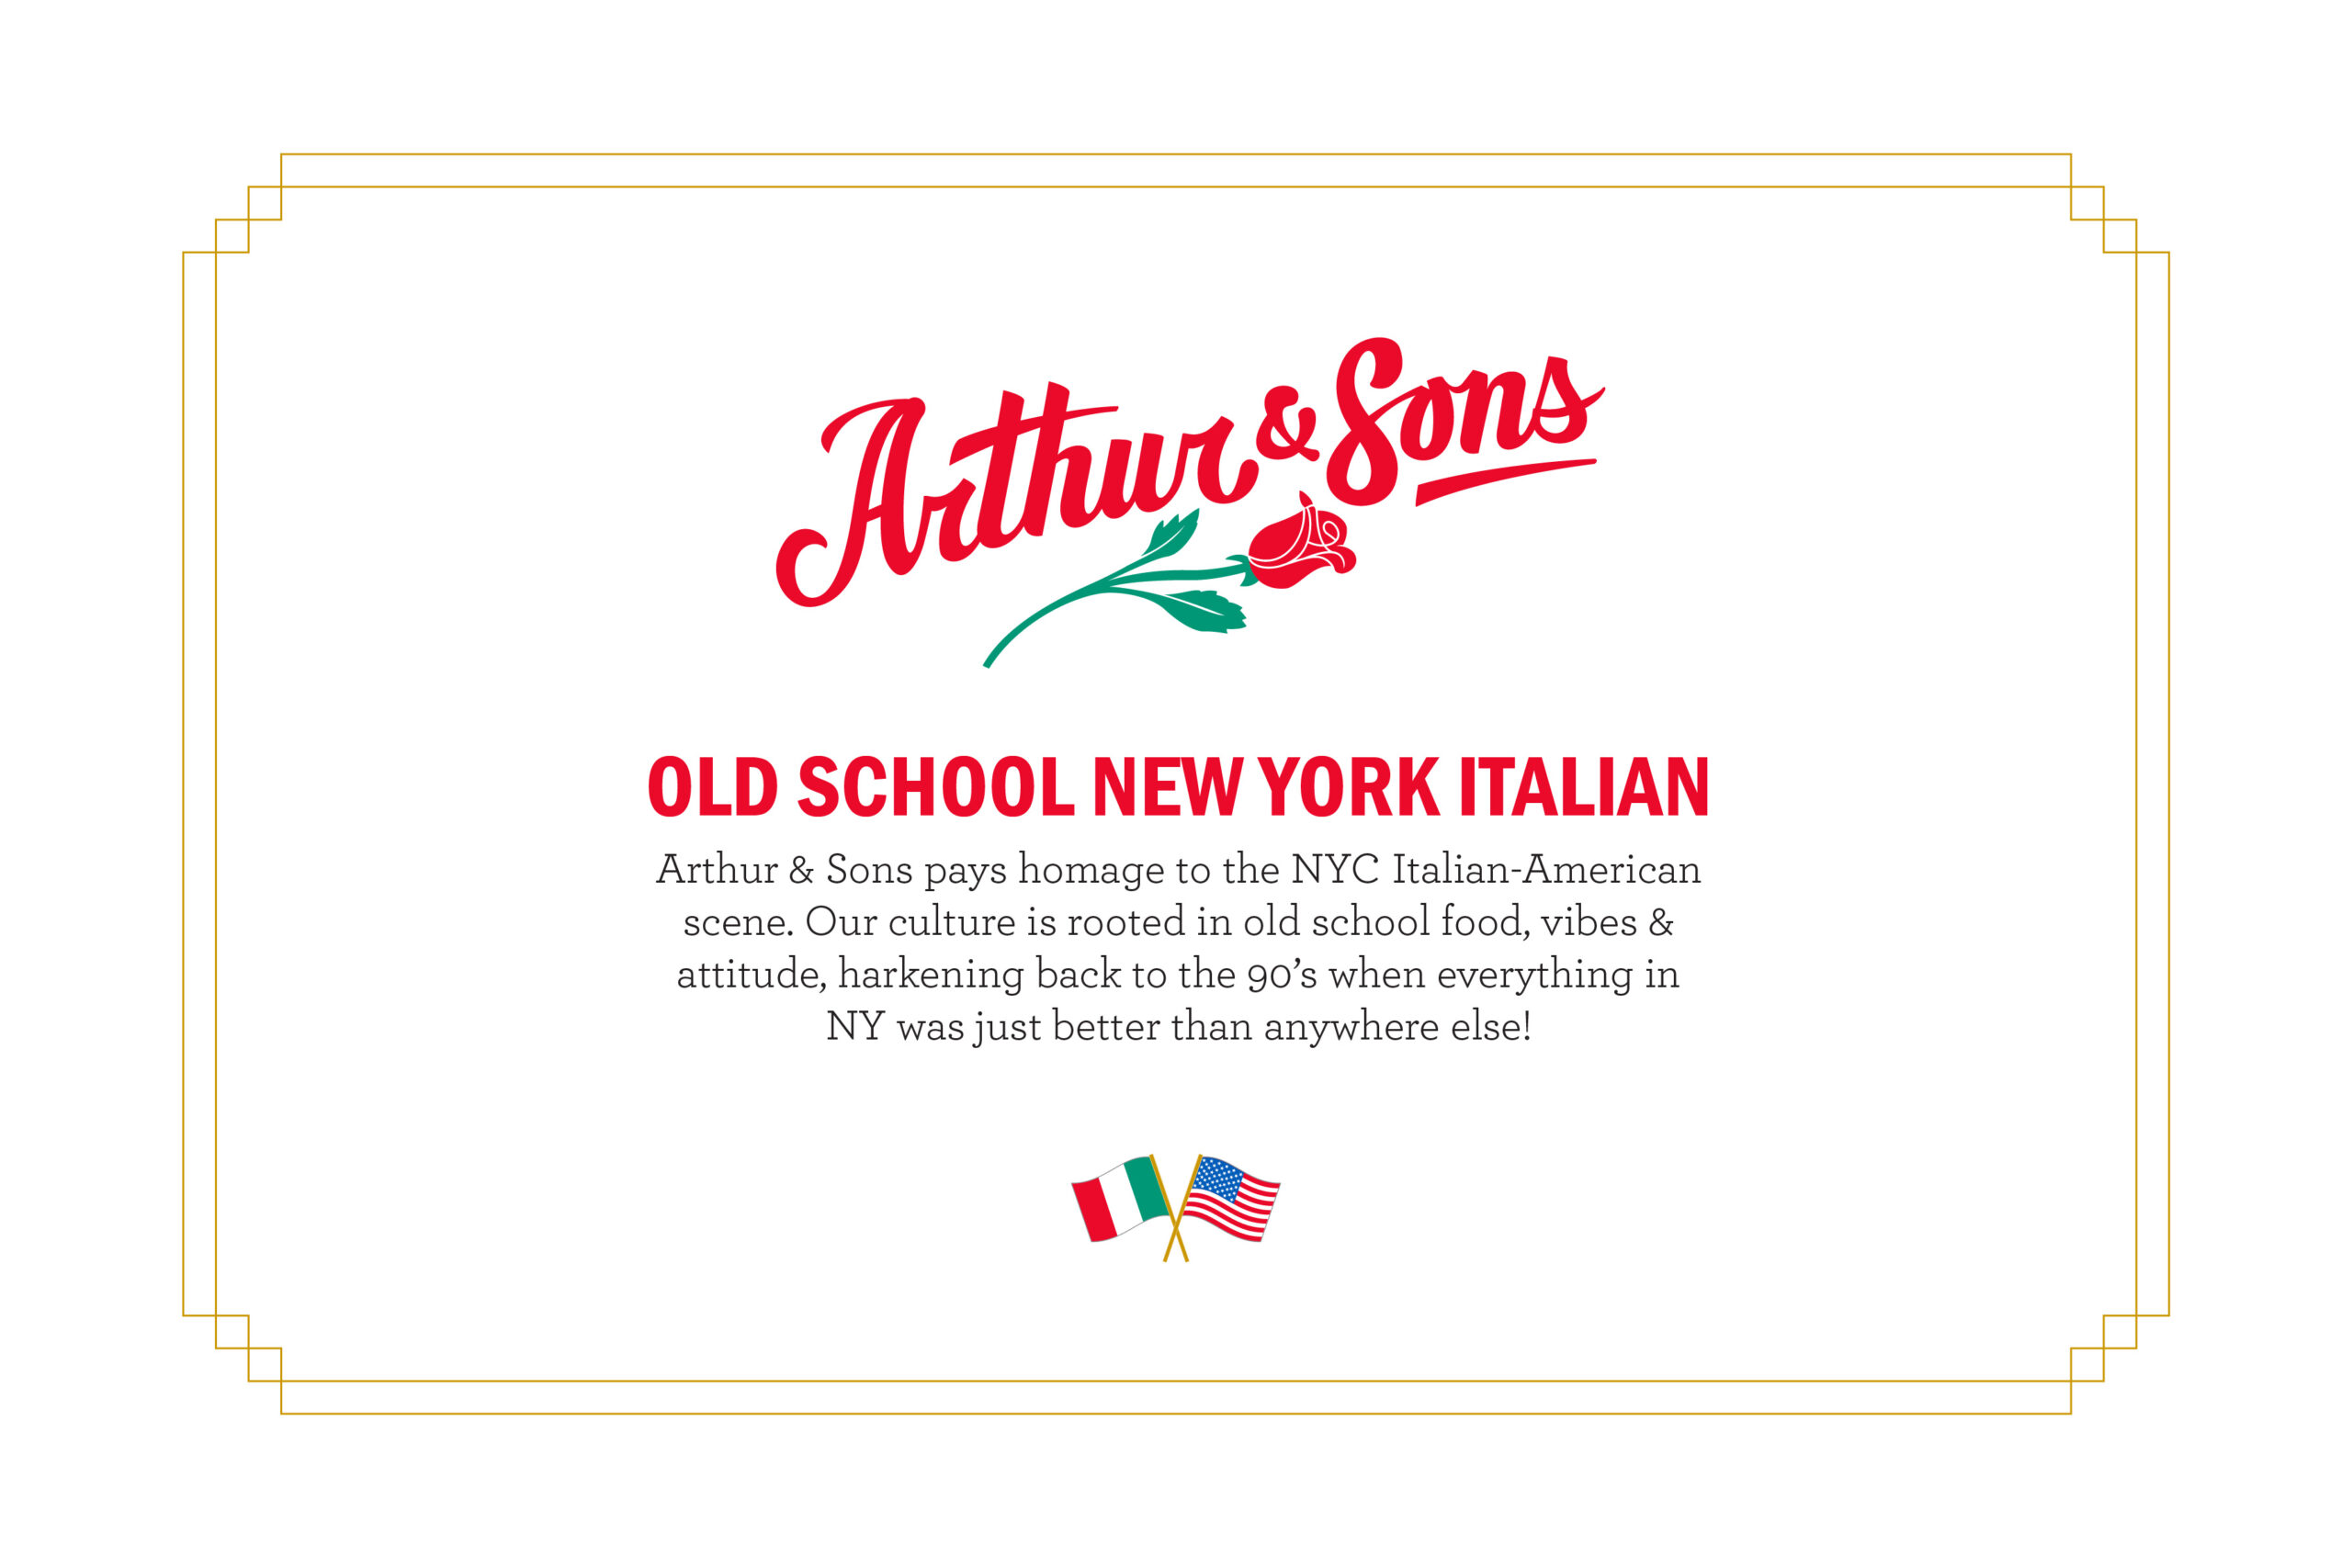 Logo and graphic design for Arthur & Sons by Madonna+Child Creative Studio